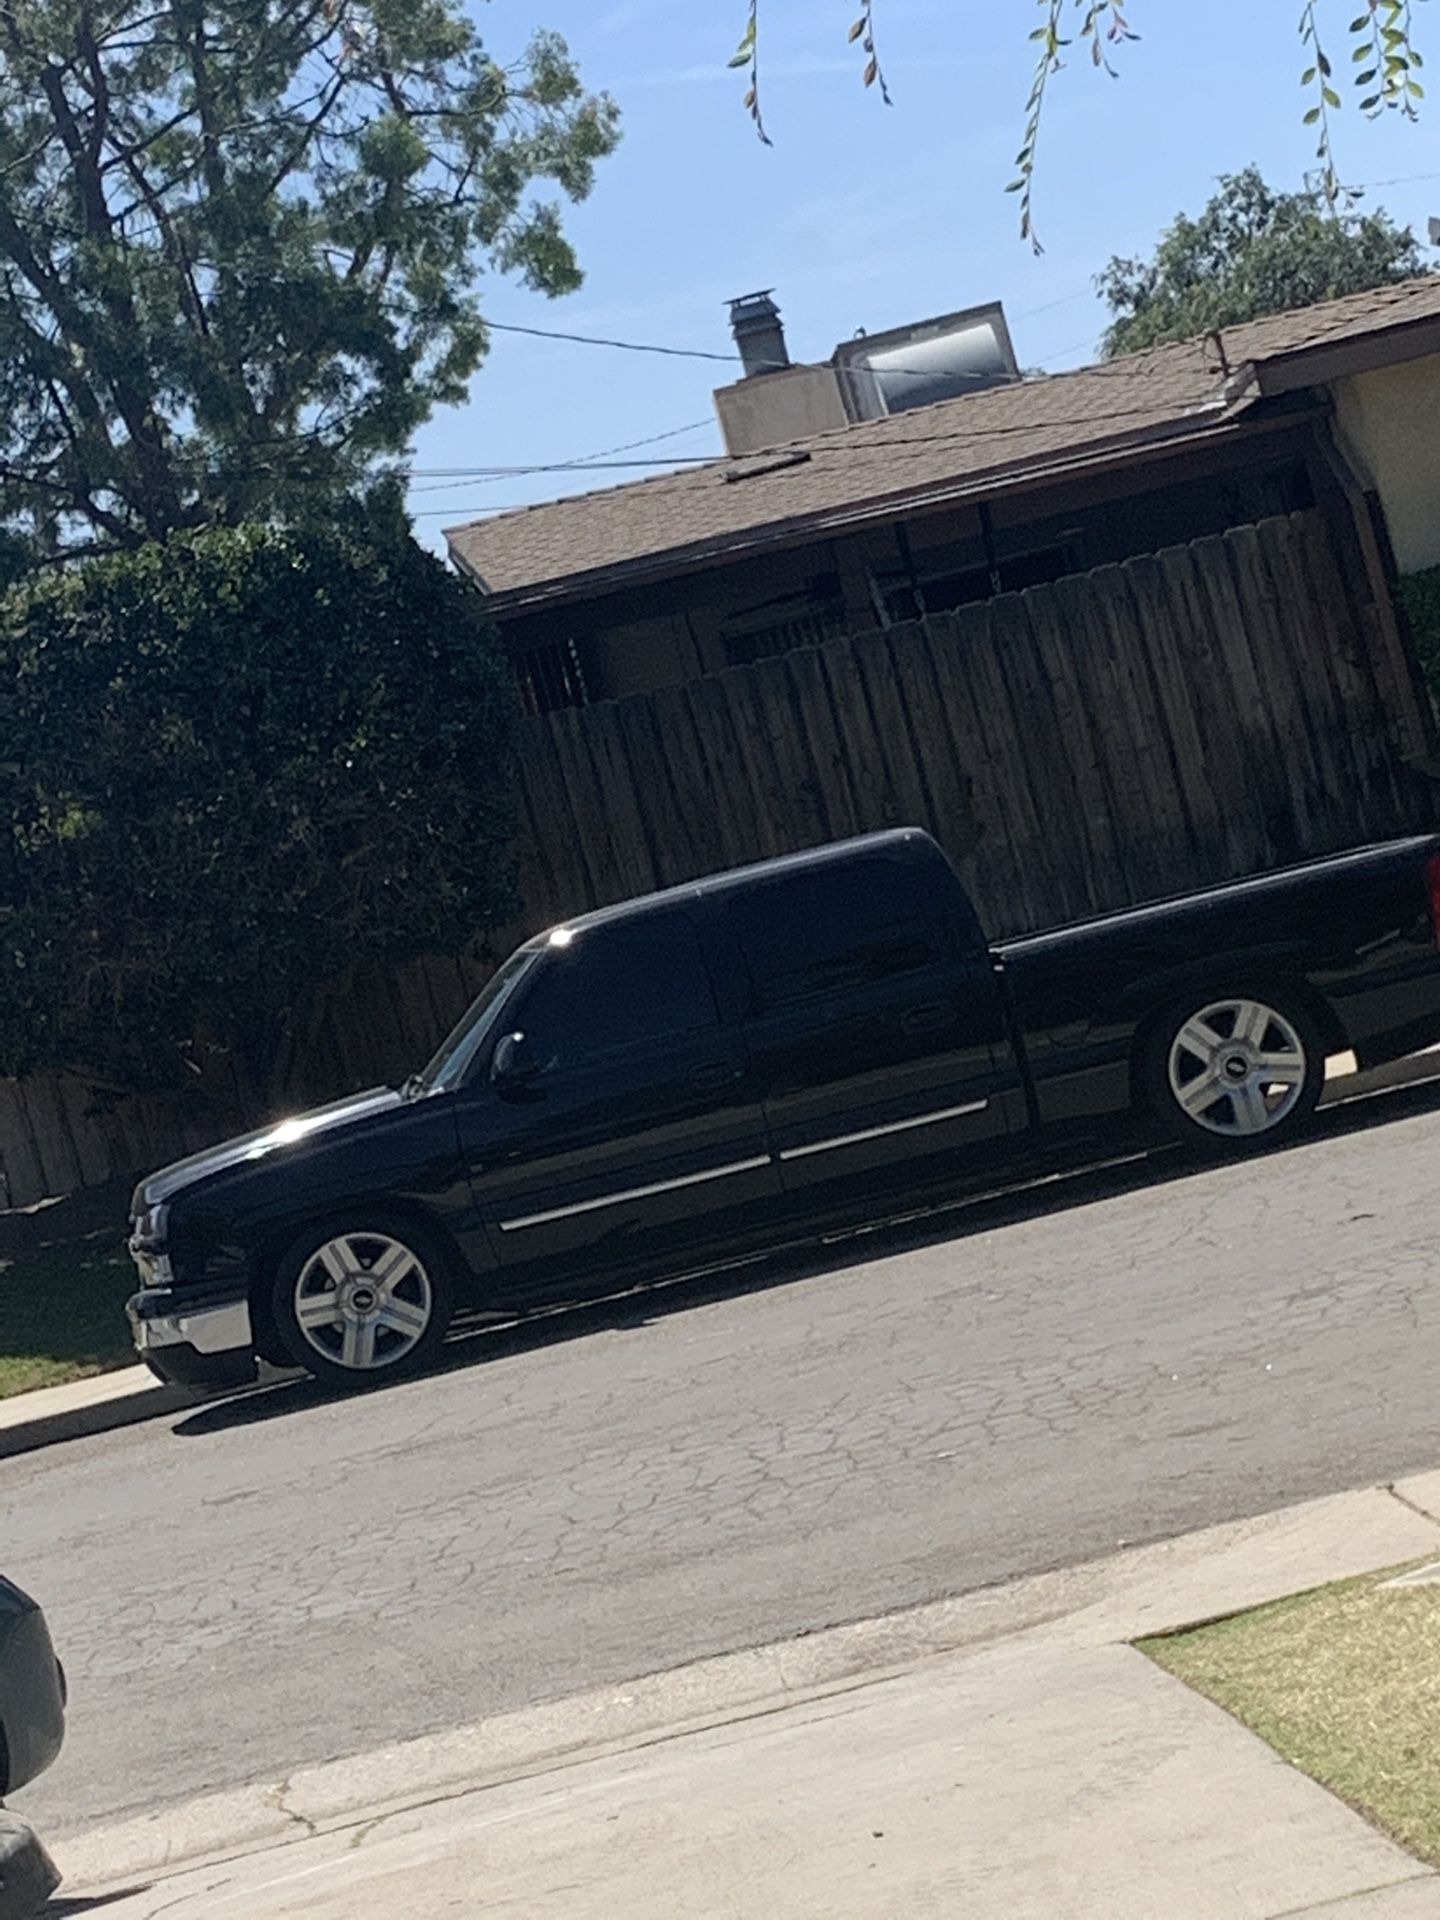 Looking to trade my truck